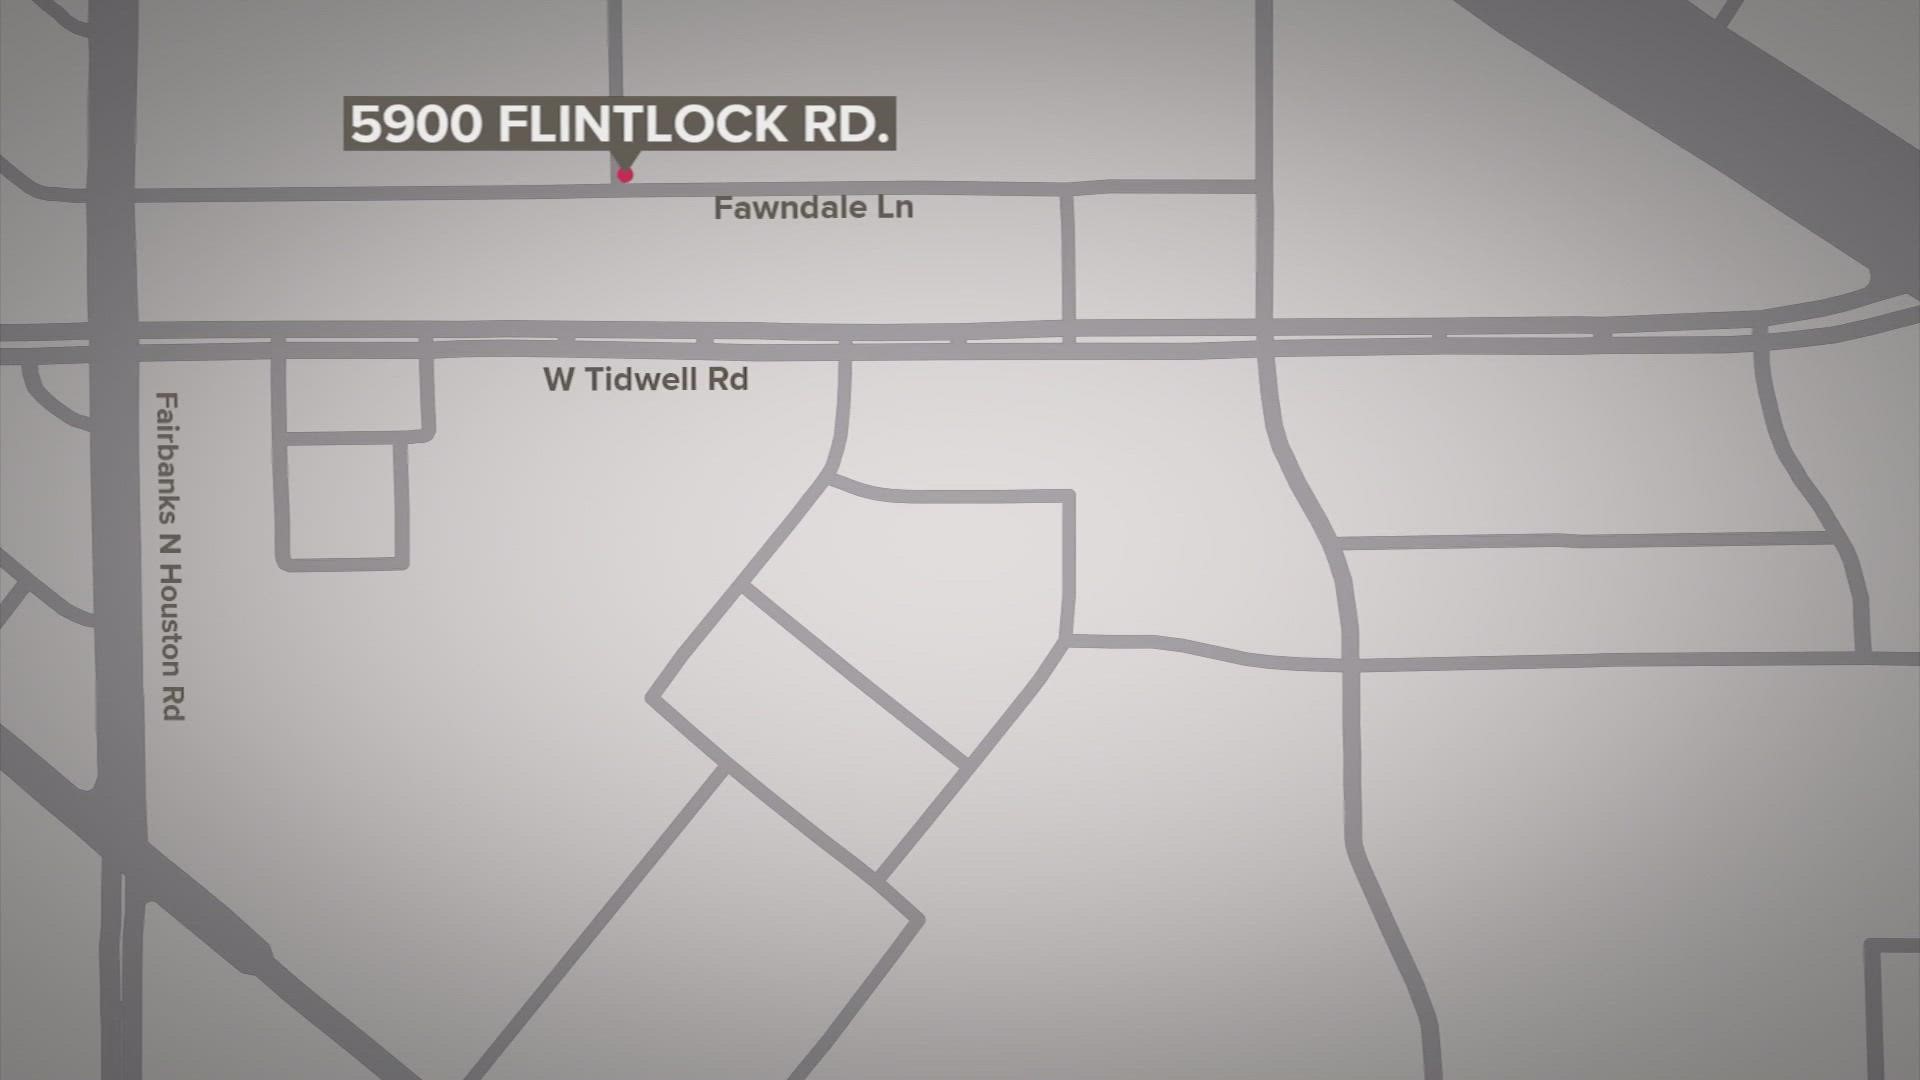 No arrest has been made after a child was found dead at an apartment complex along Flintlock Road in Houston, Texas.